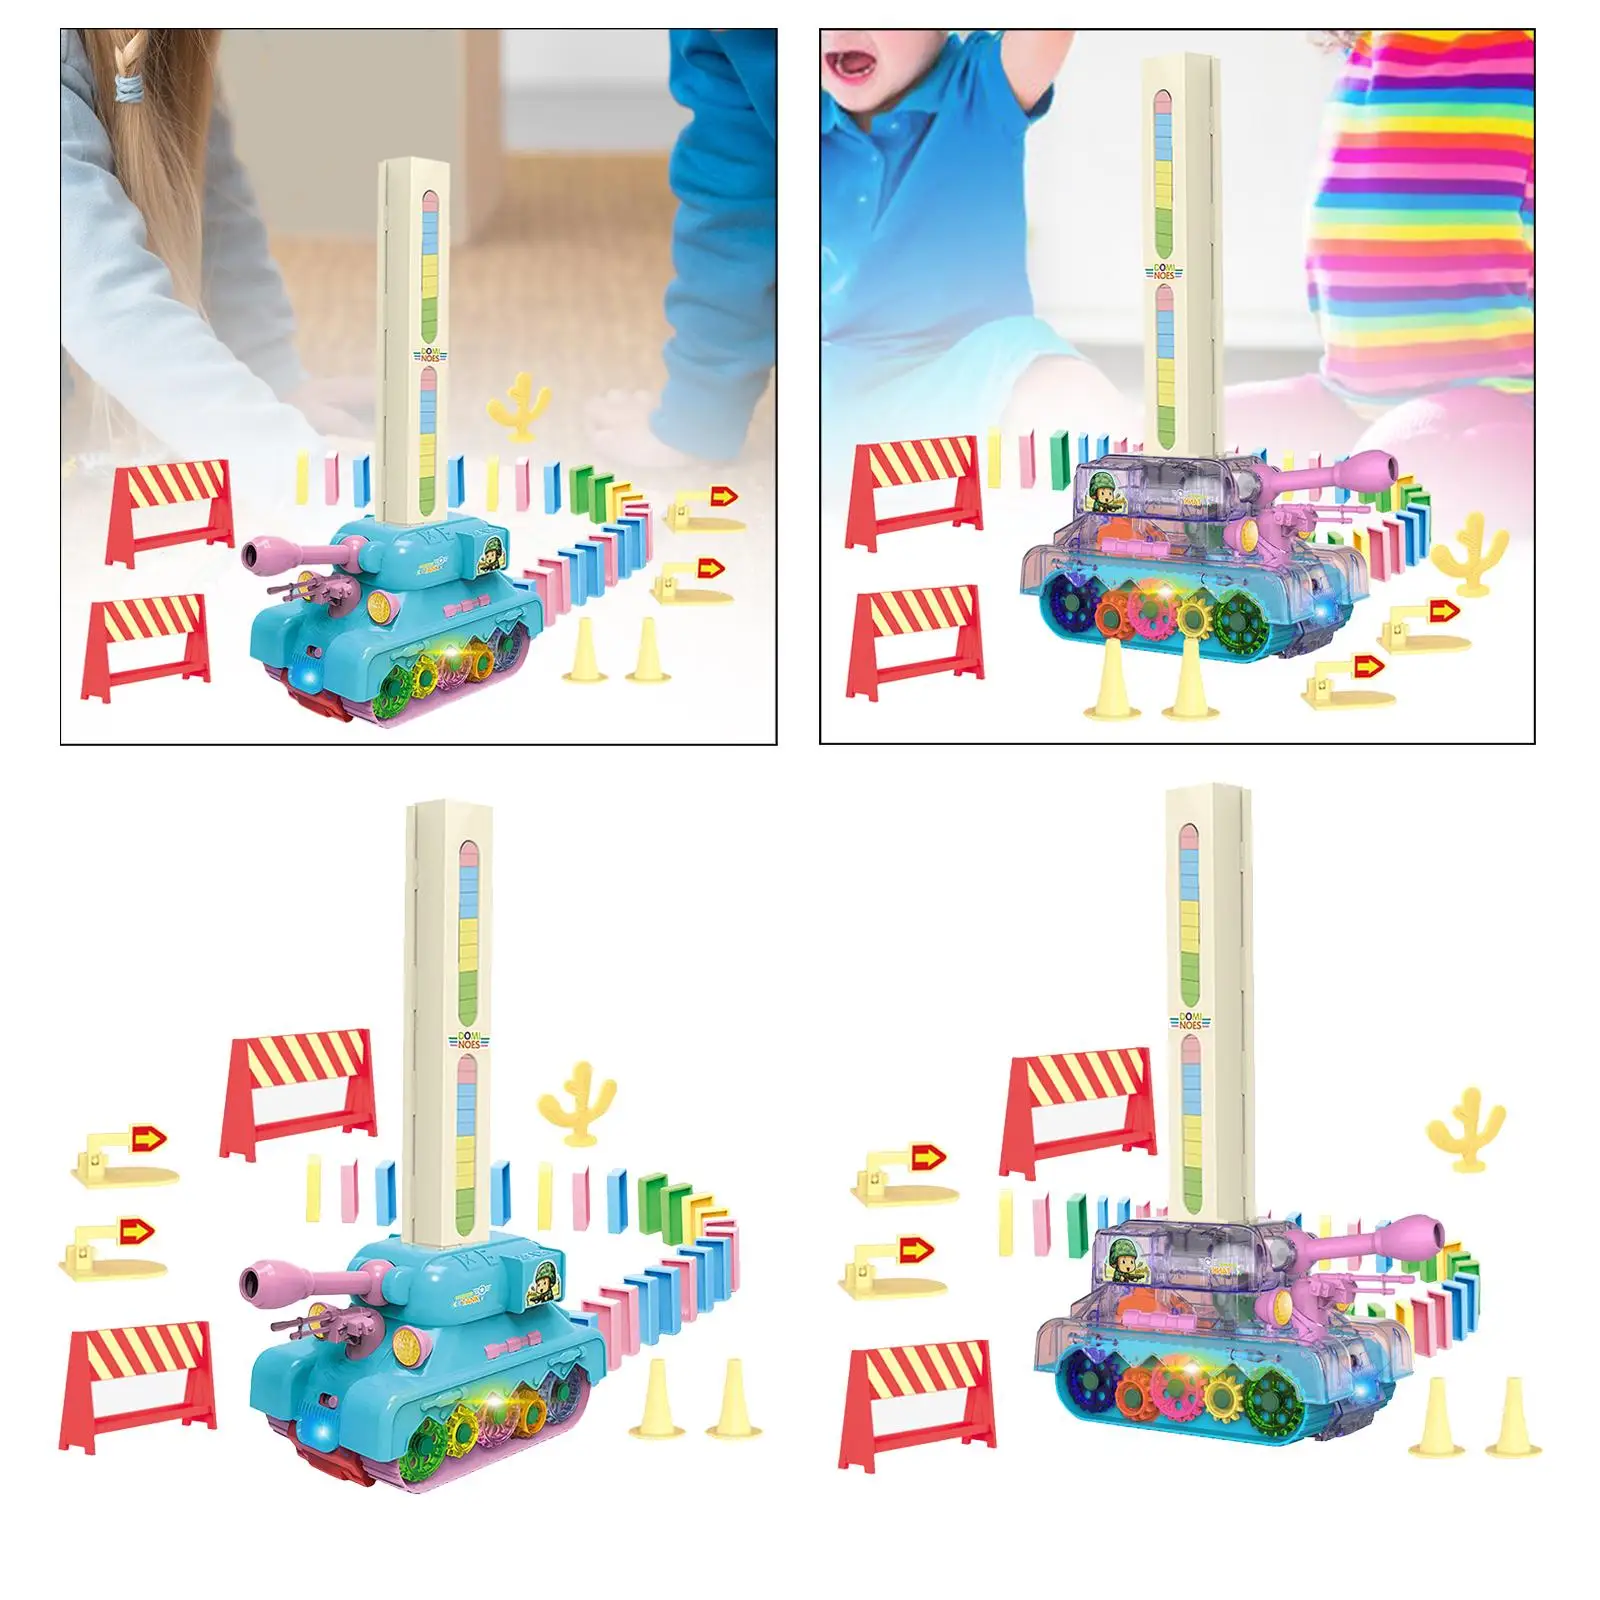 Electric Tank Blocks Toys Building and Stacking Blocks Educational Toys Laying Toy Tank Set for Boys Children Birthday Gifts